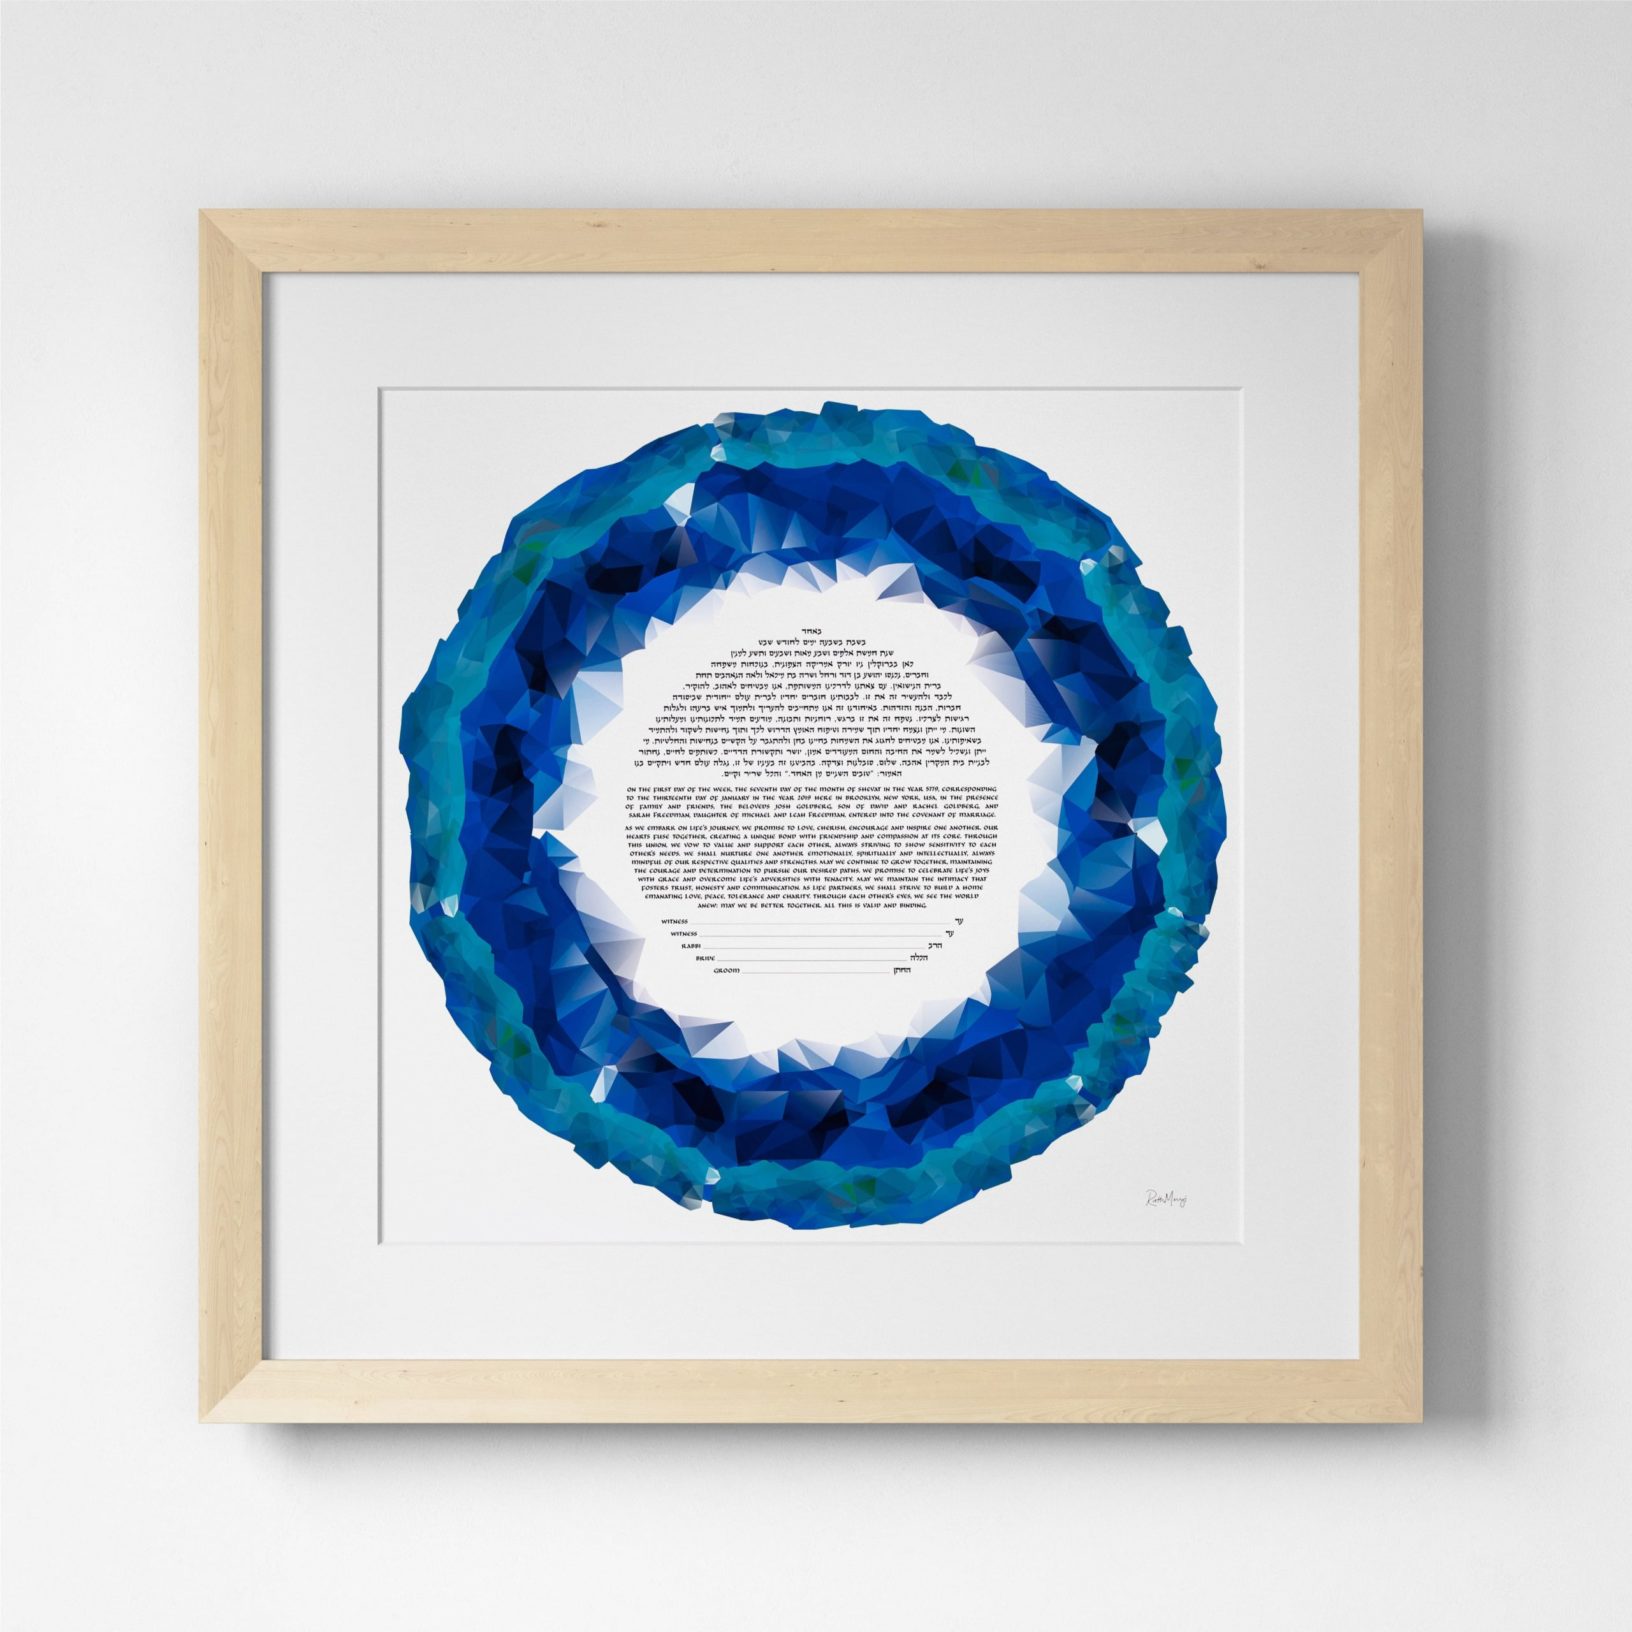 Mineral Ketubah Marriage Contracts by Ruth Mergi